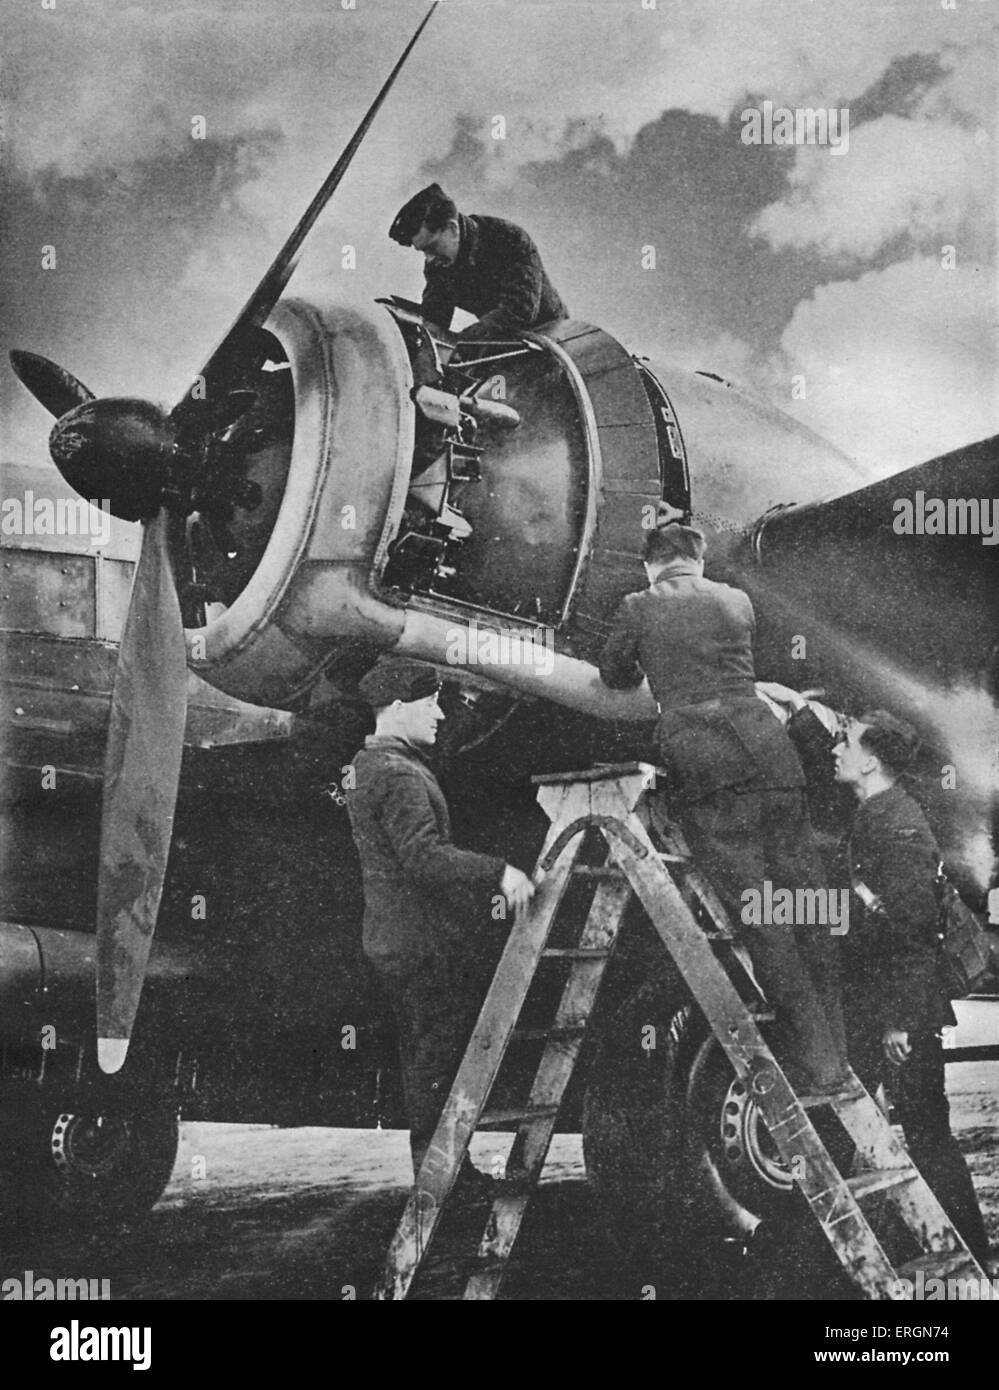 WW2 - Ground crew tuning the engine of a British bomber. Caption reads: Before the raid. The ground crew tuning the engine of a Stock Photo